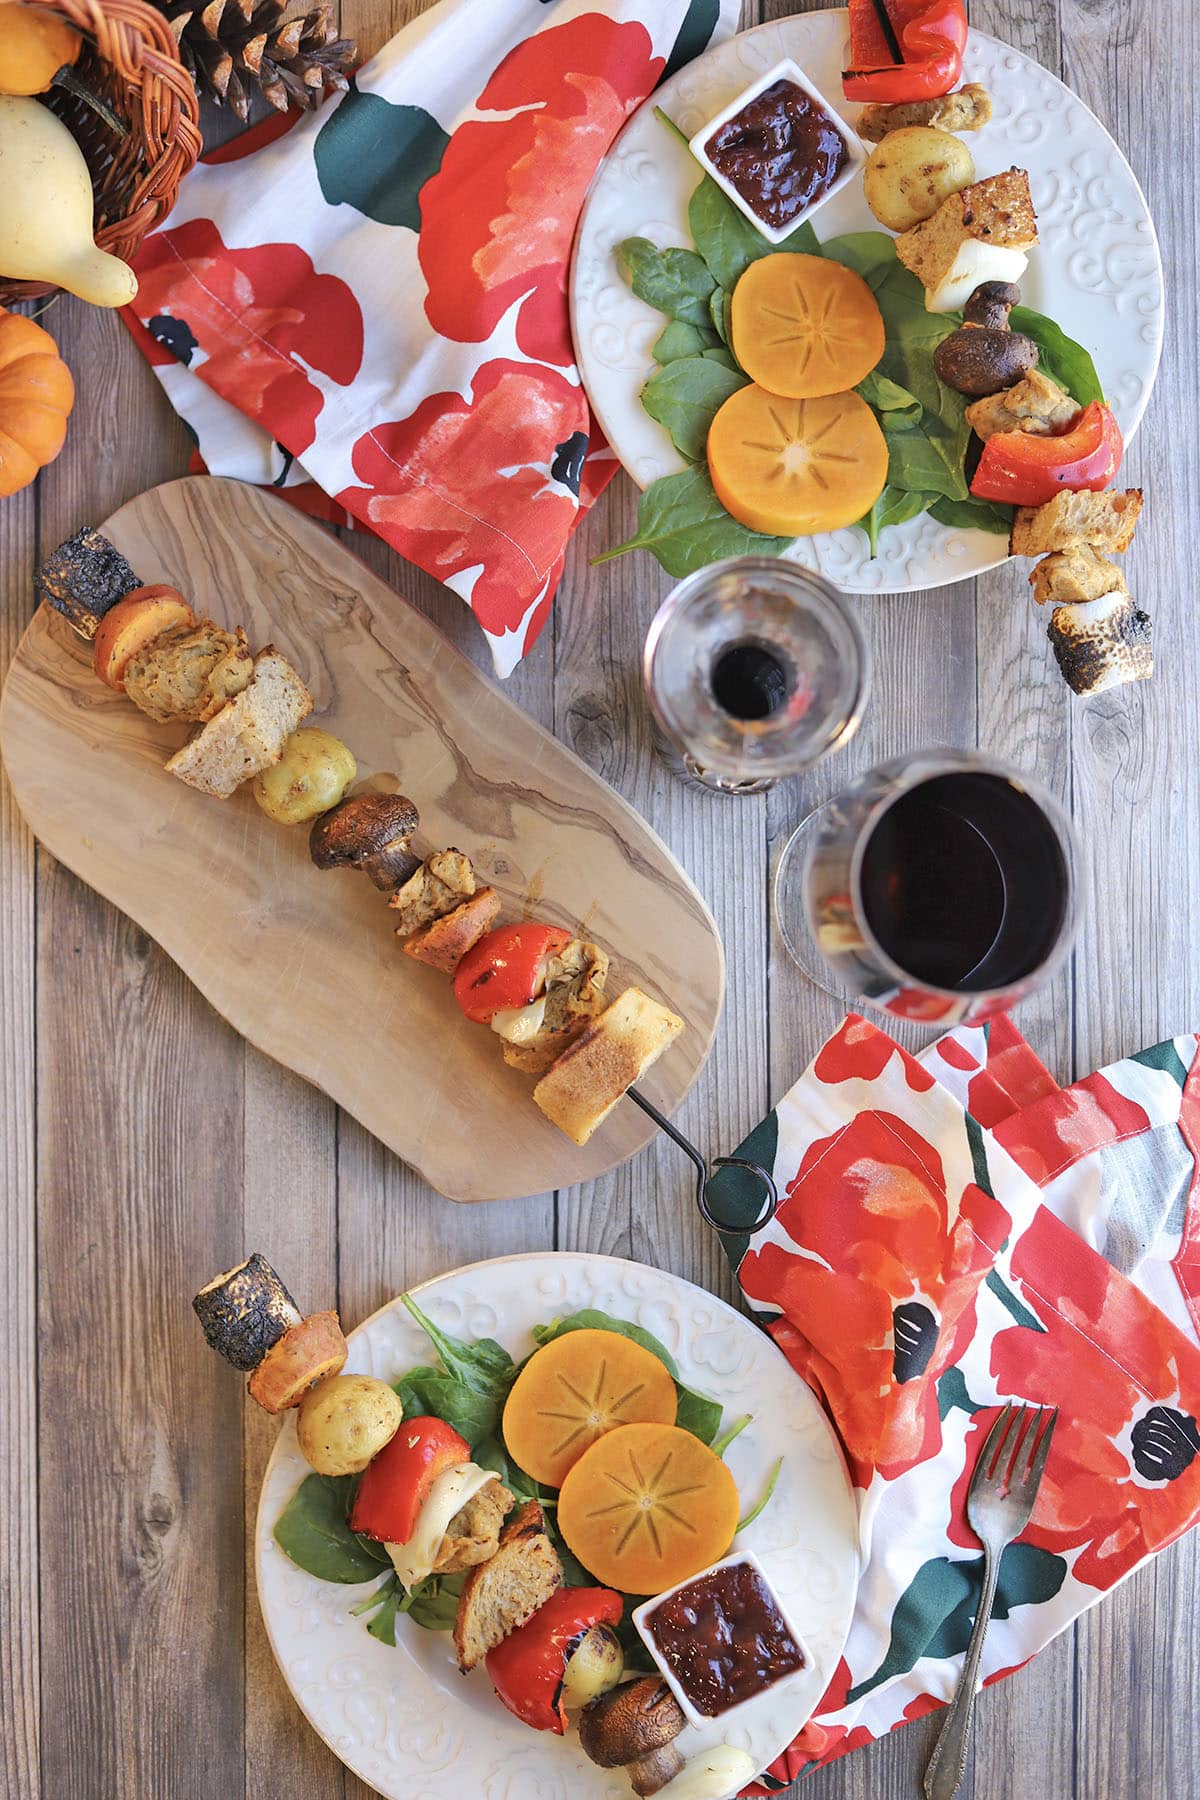 Vegan kebabs on table with wine and colorful napkins.